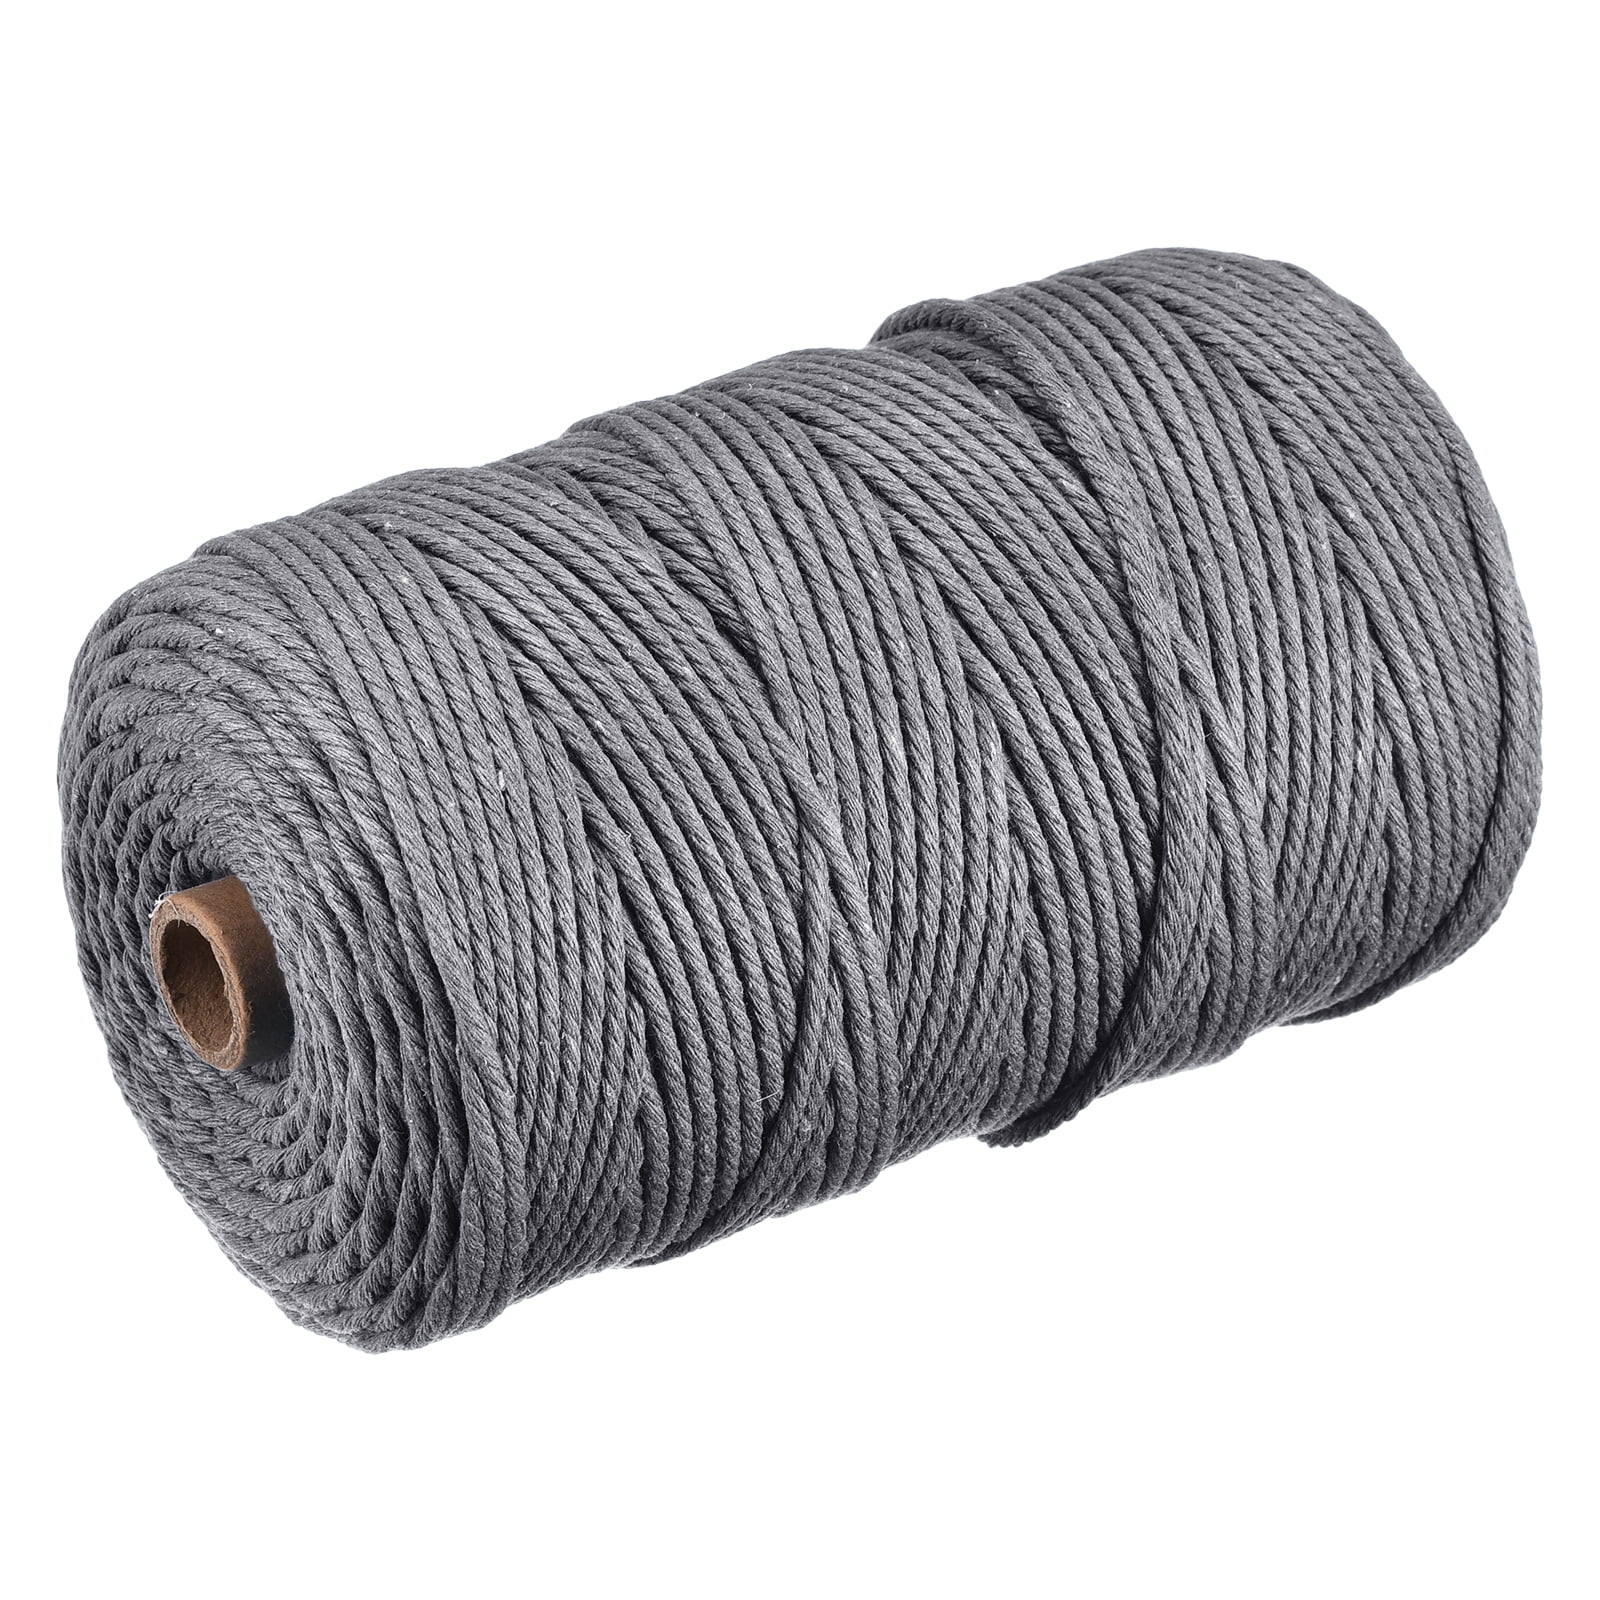 Uxcell Cotton Rope Twine String Twisted Braided Cord, Black 200m/218 Yard  for Wall Hanging, Macrame Knotting 